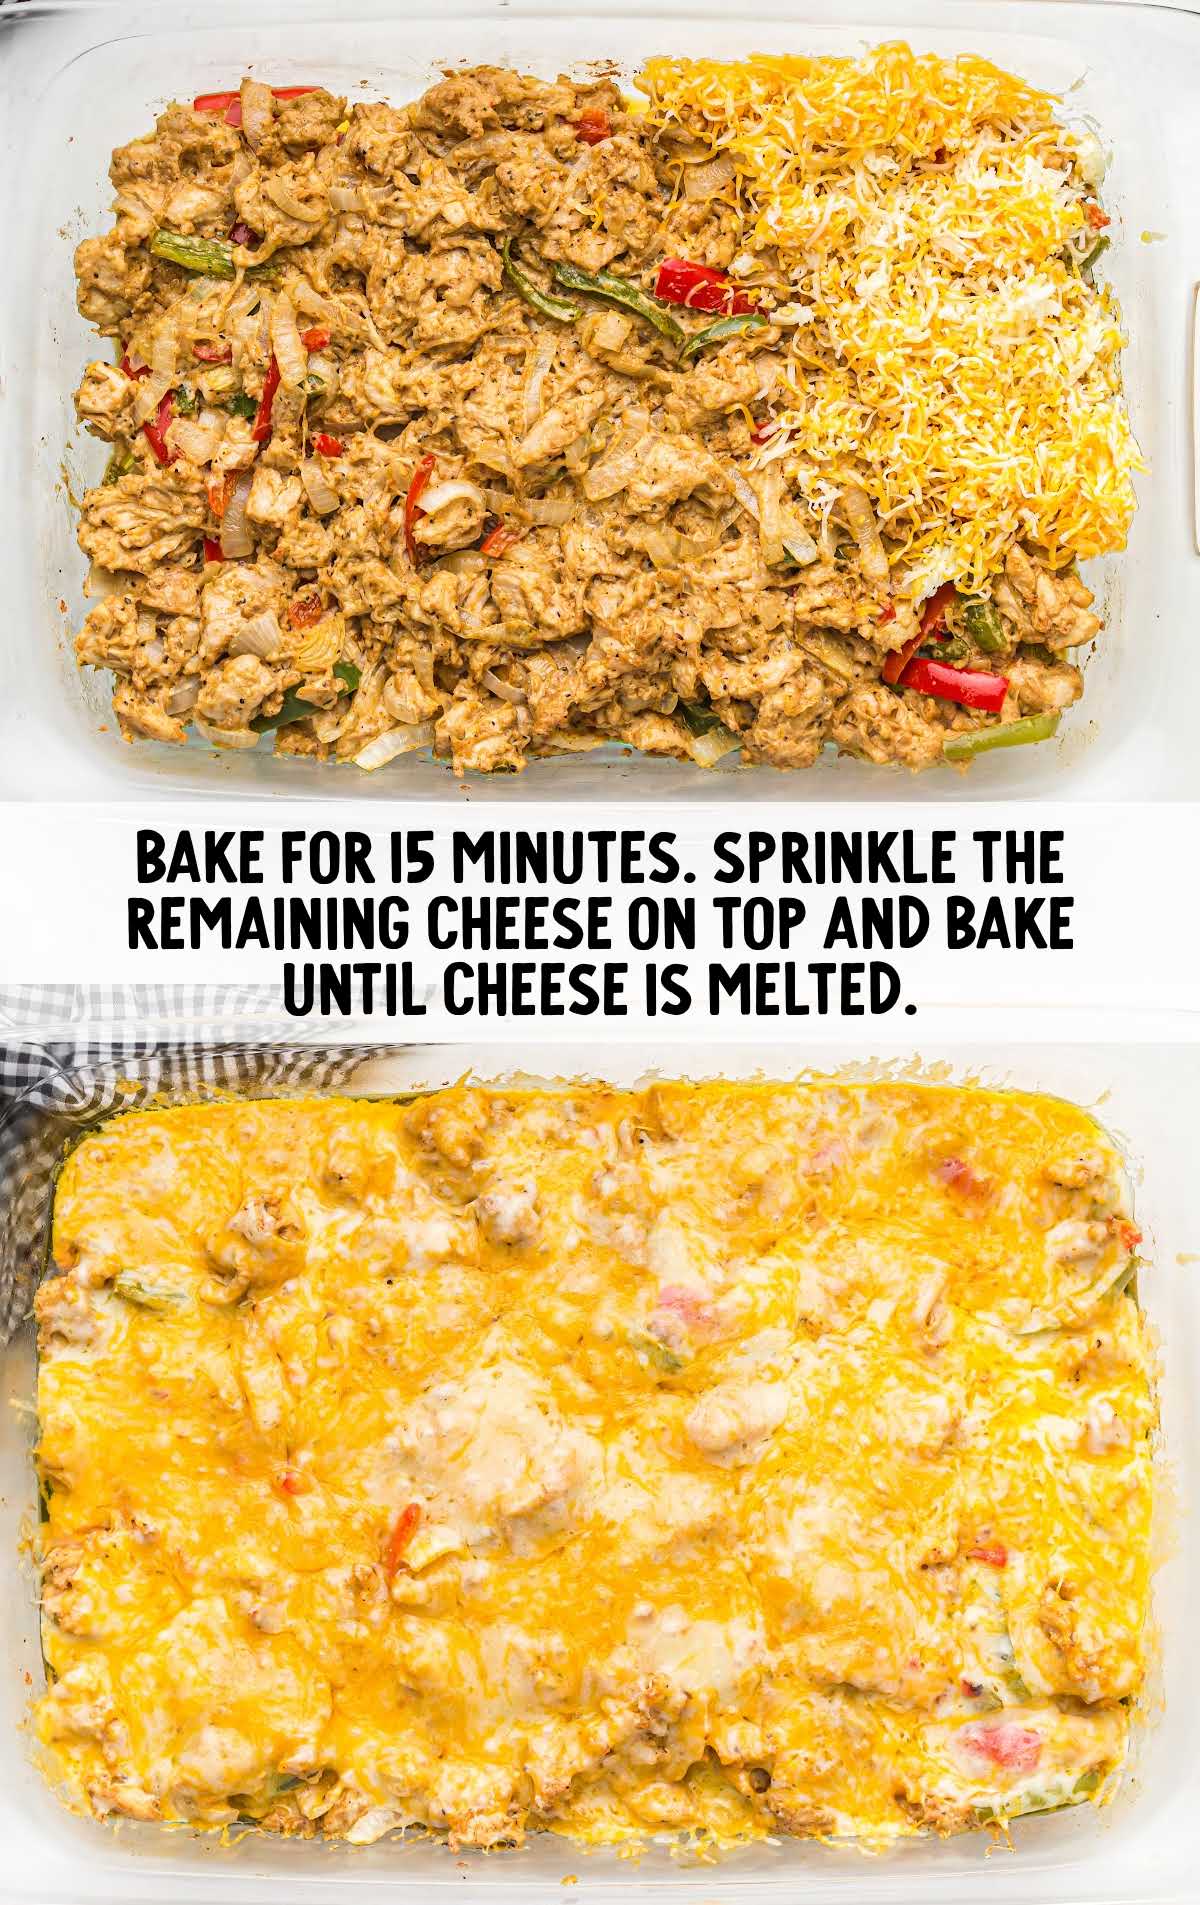 chicken mixture added to the casserole dish then topped with shredded cheese